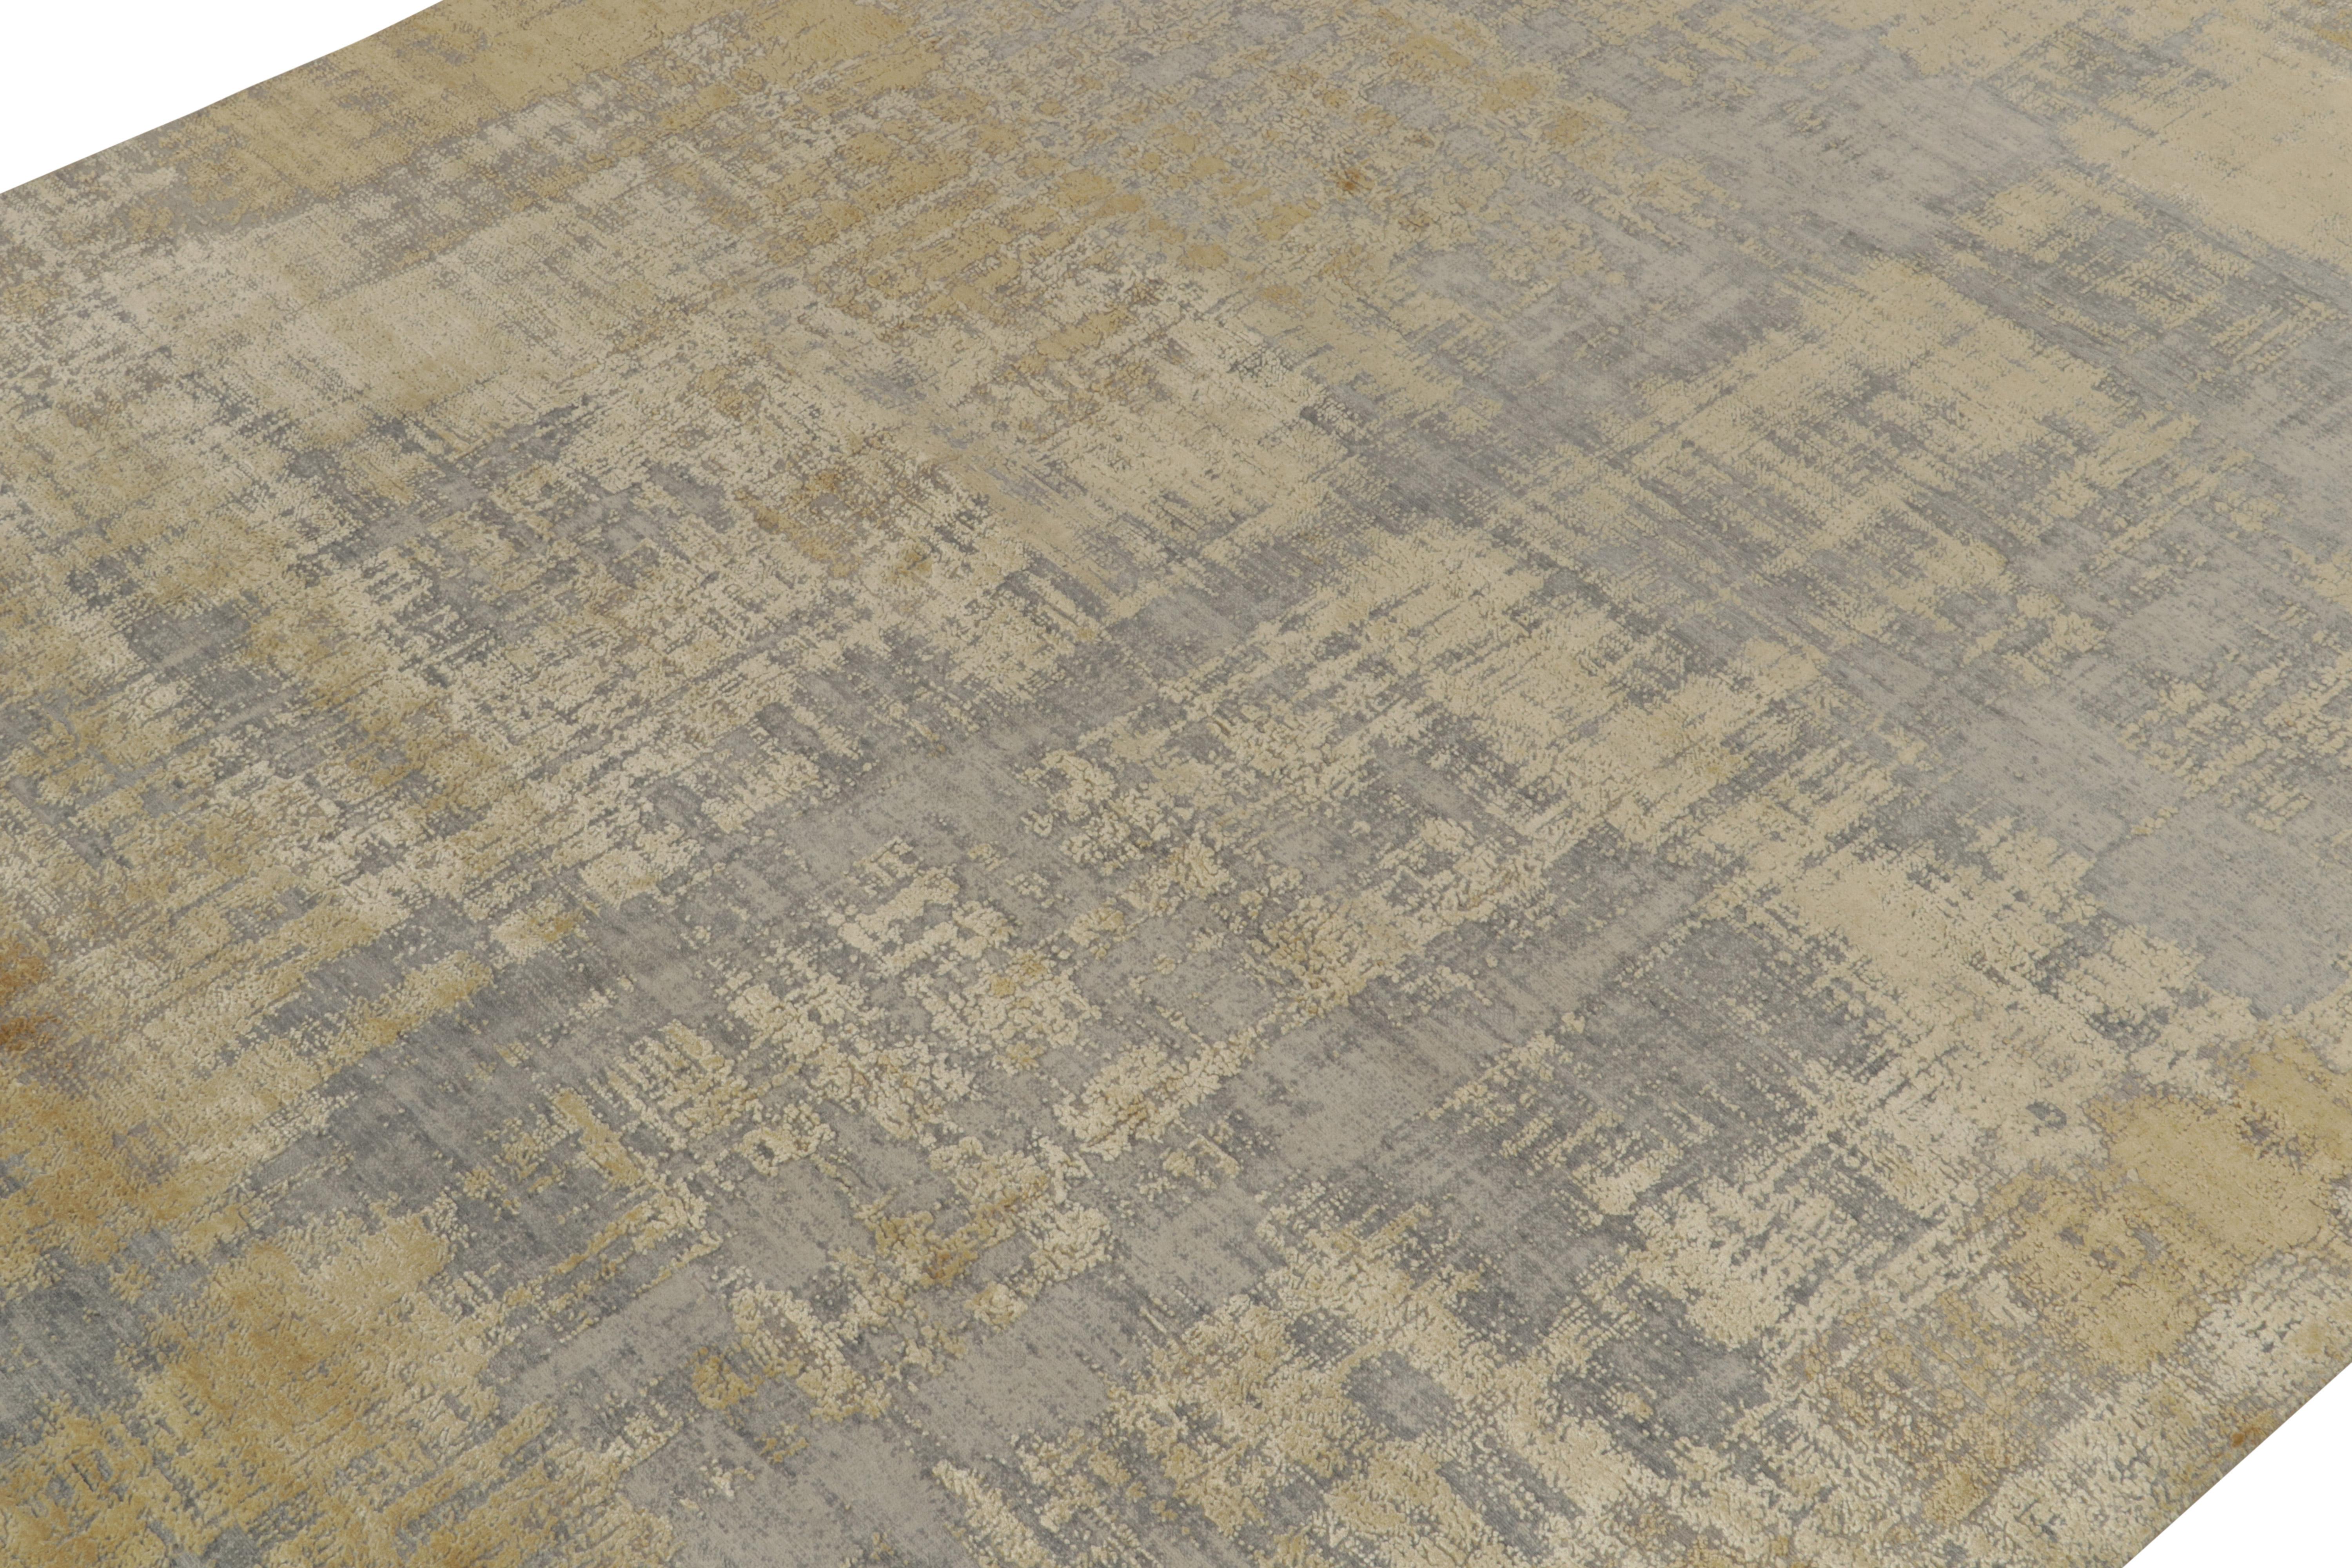 Indian Rug & Kilim’s Abstract  Rug in Gold and Silver-Gray All over Streak Pattern For Sale